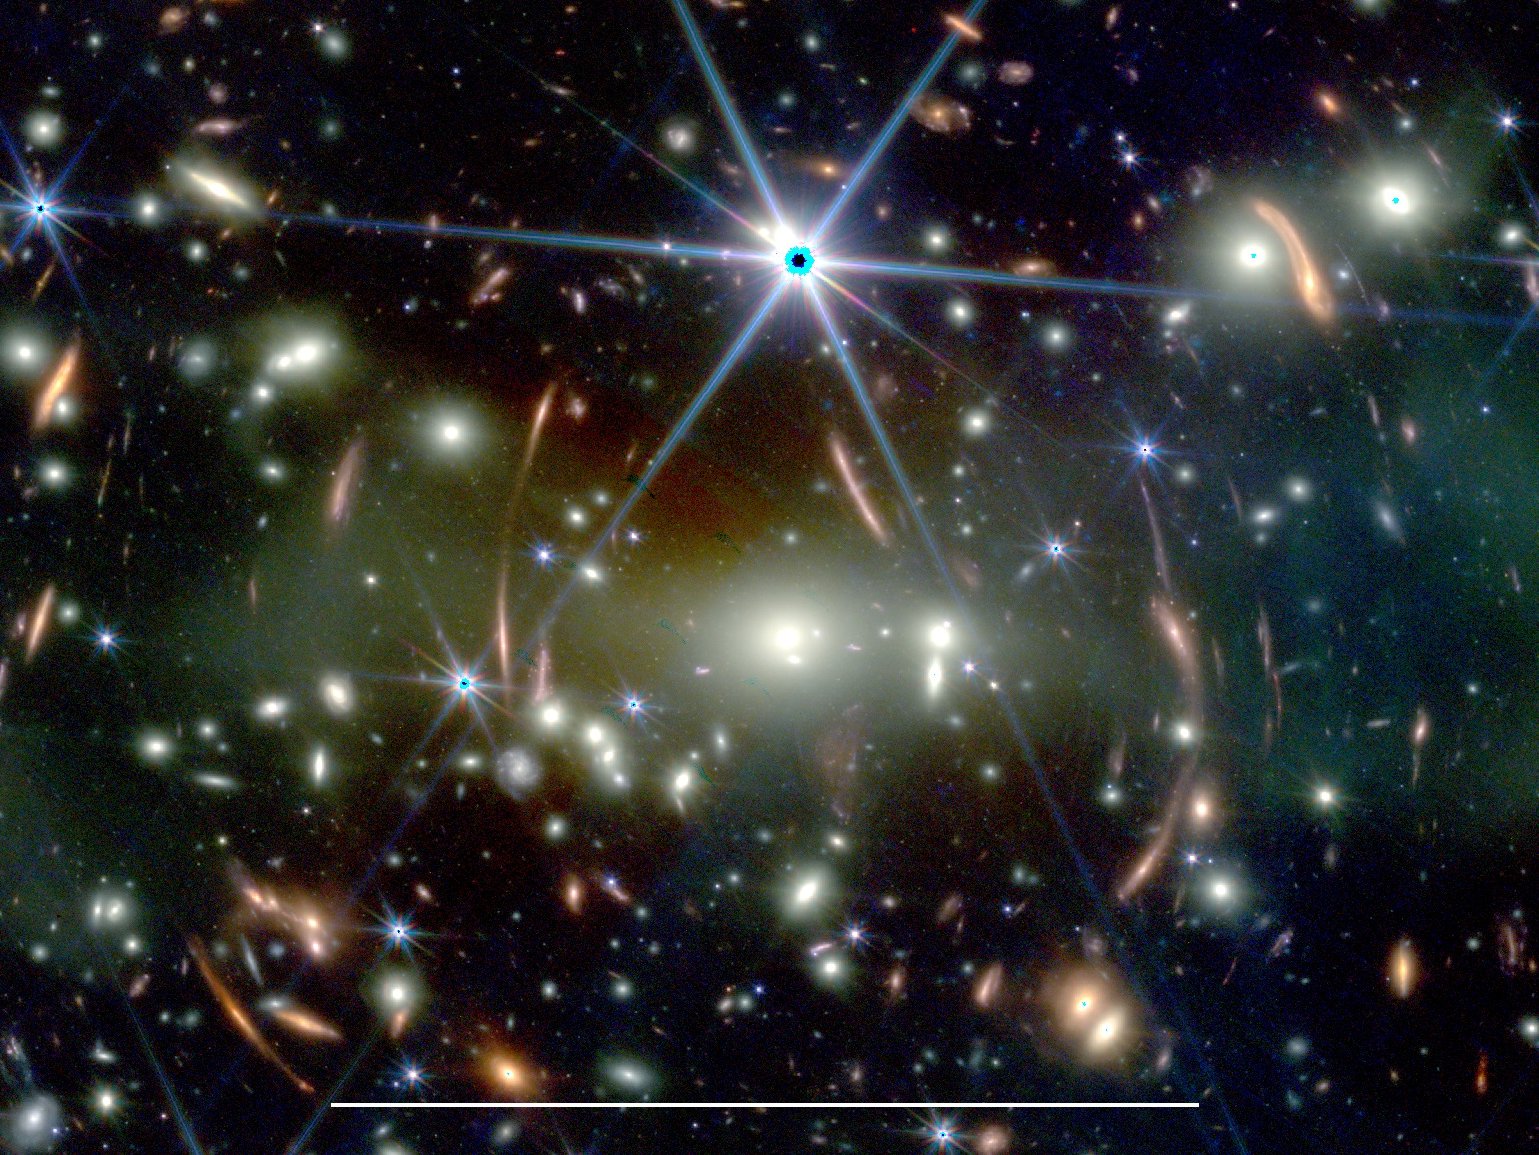 This JWST image shows the galaxy cluster SMACS J0723.3−7327 with a large number of lensed background galaxies. The white bar at the bottom corresponds to 50 arcsec, which is approximately the maximum size of Jupiter observed from Earth.